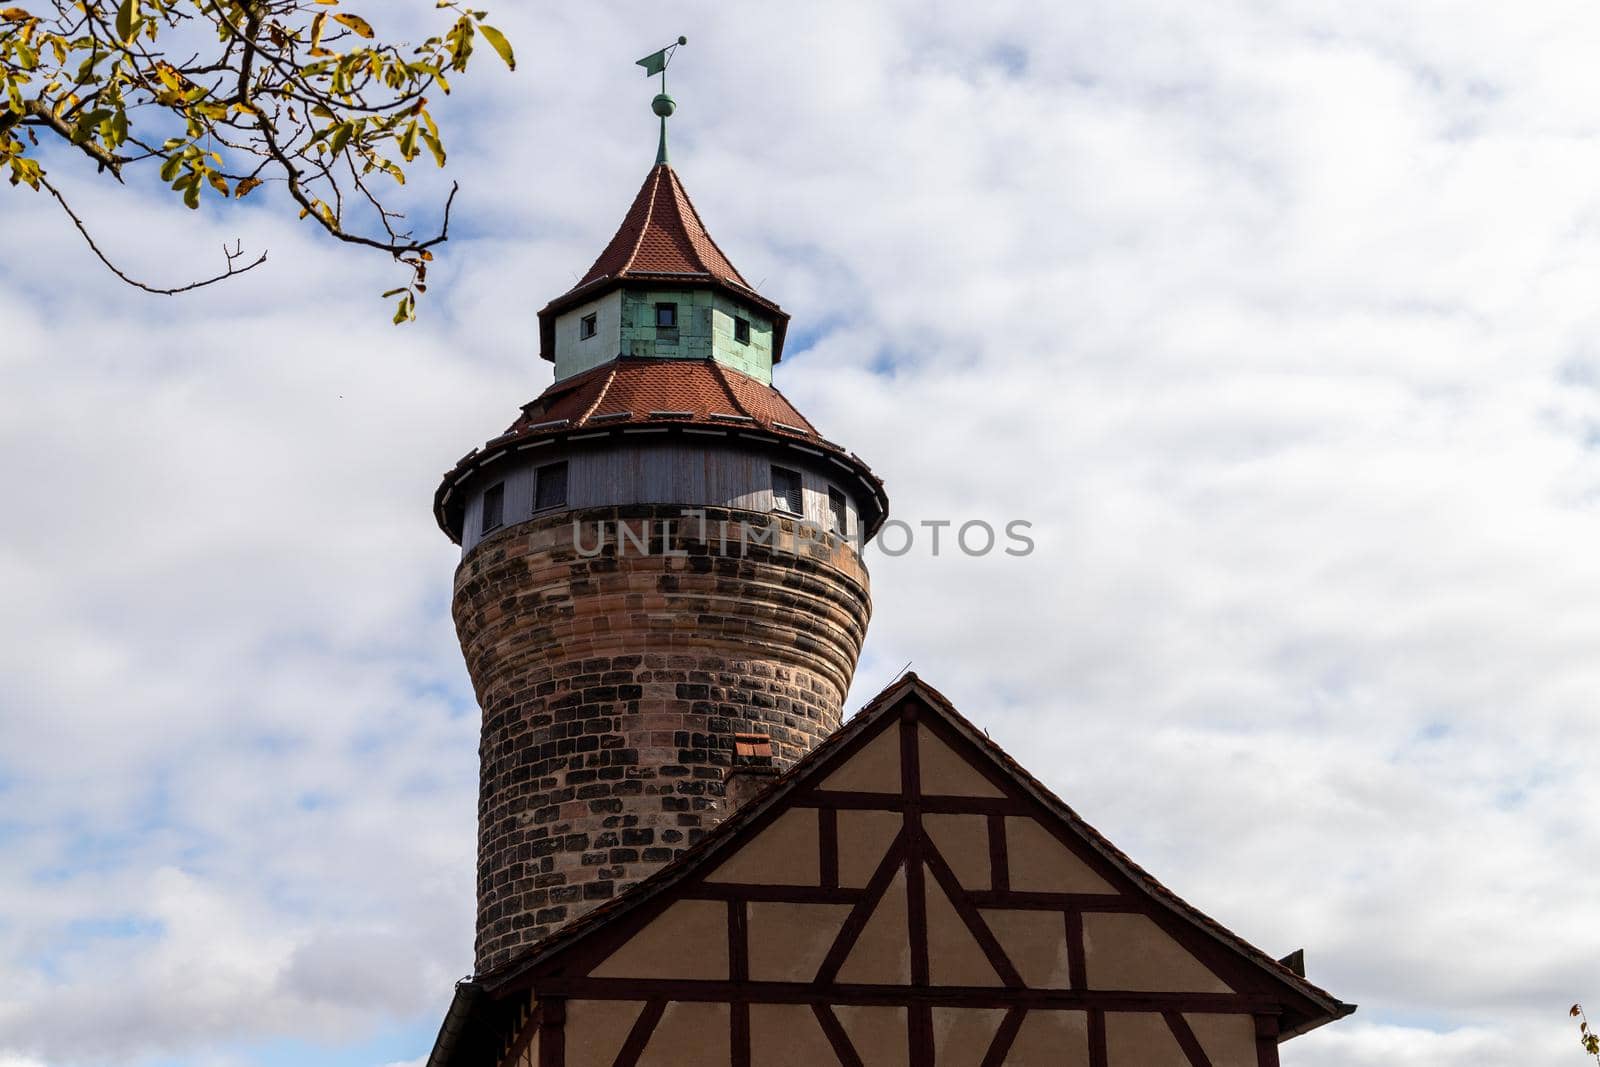 Historic tower and building of the Nuremberg castle, Bavaria, Germany  in autunm on a sunny day